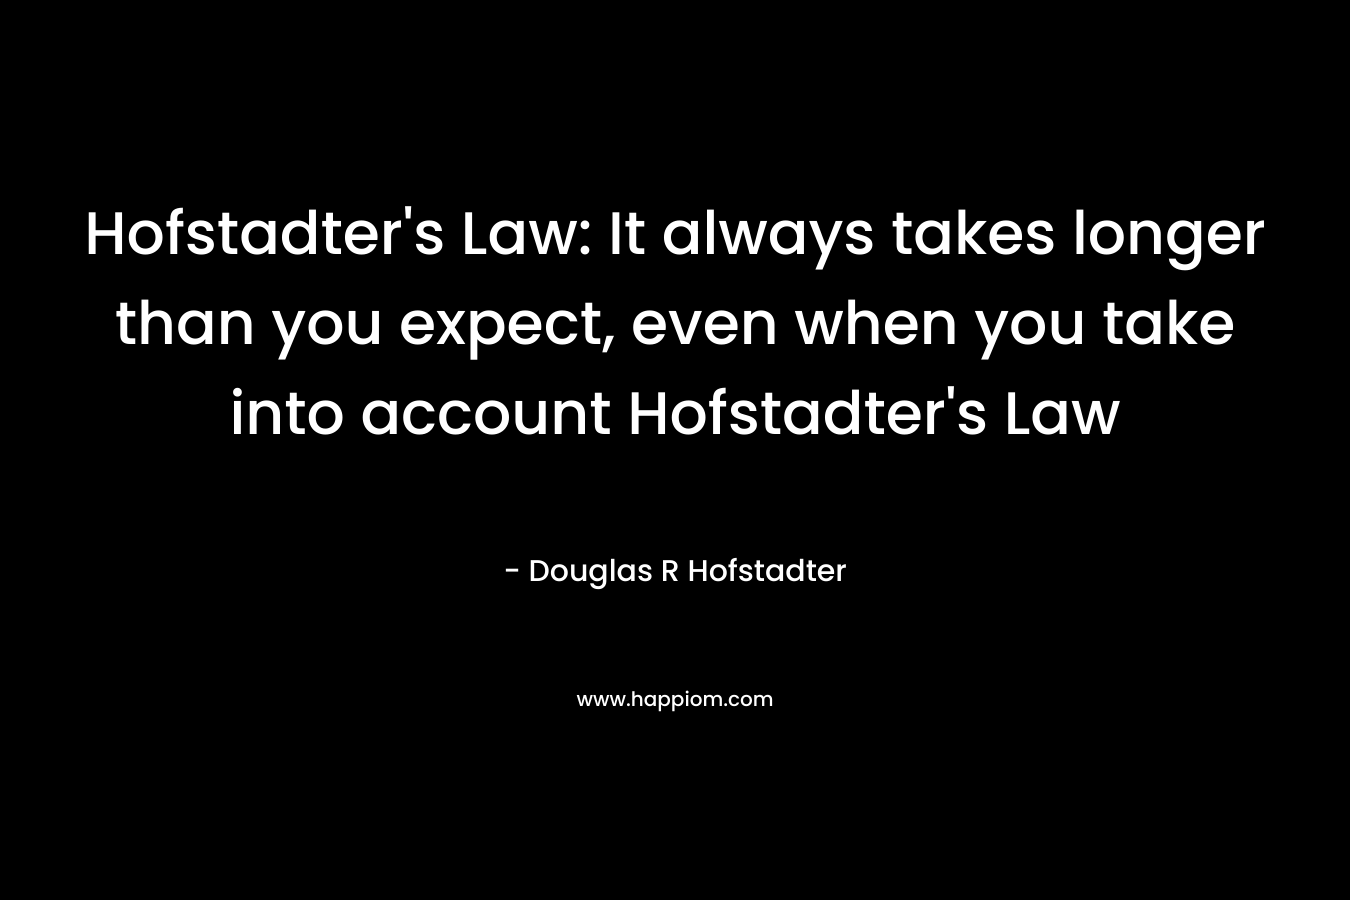 Hofstadter's Law: It always takes longer than you expect, even when you take into account Hofstadter's Law